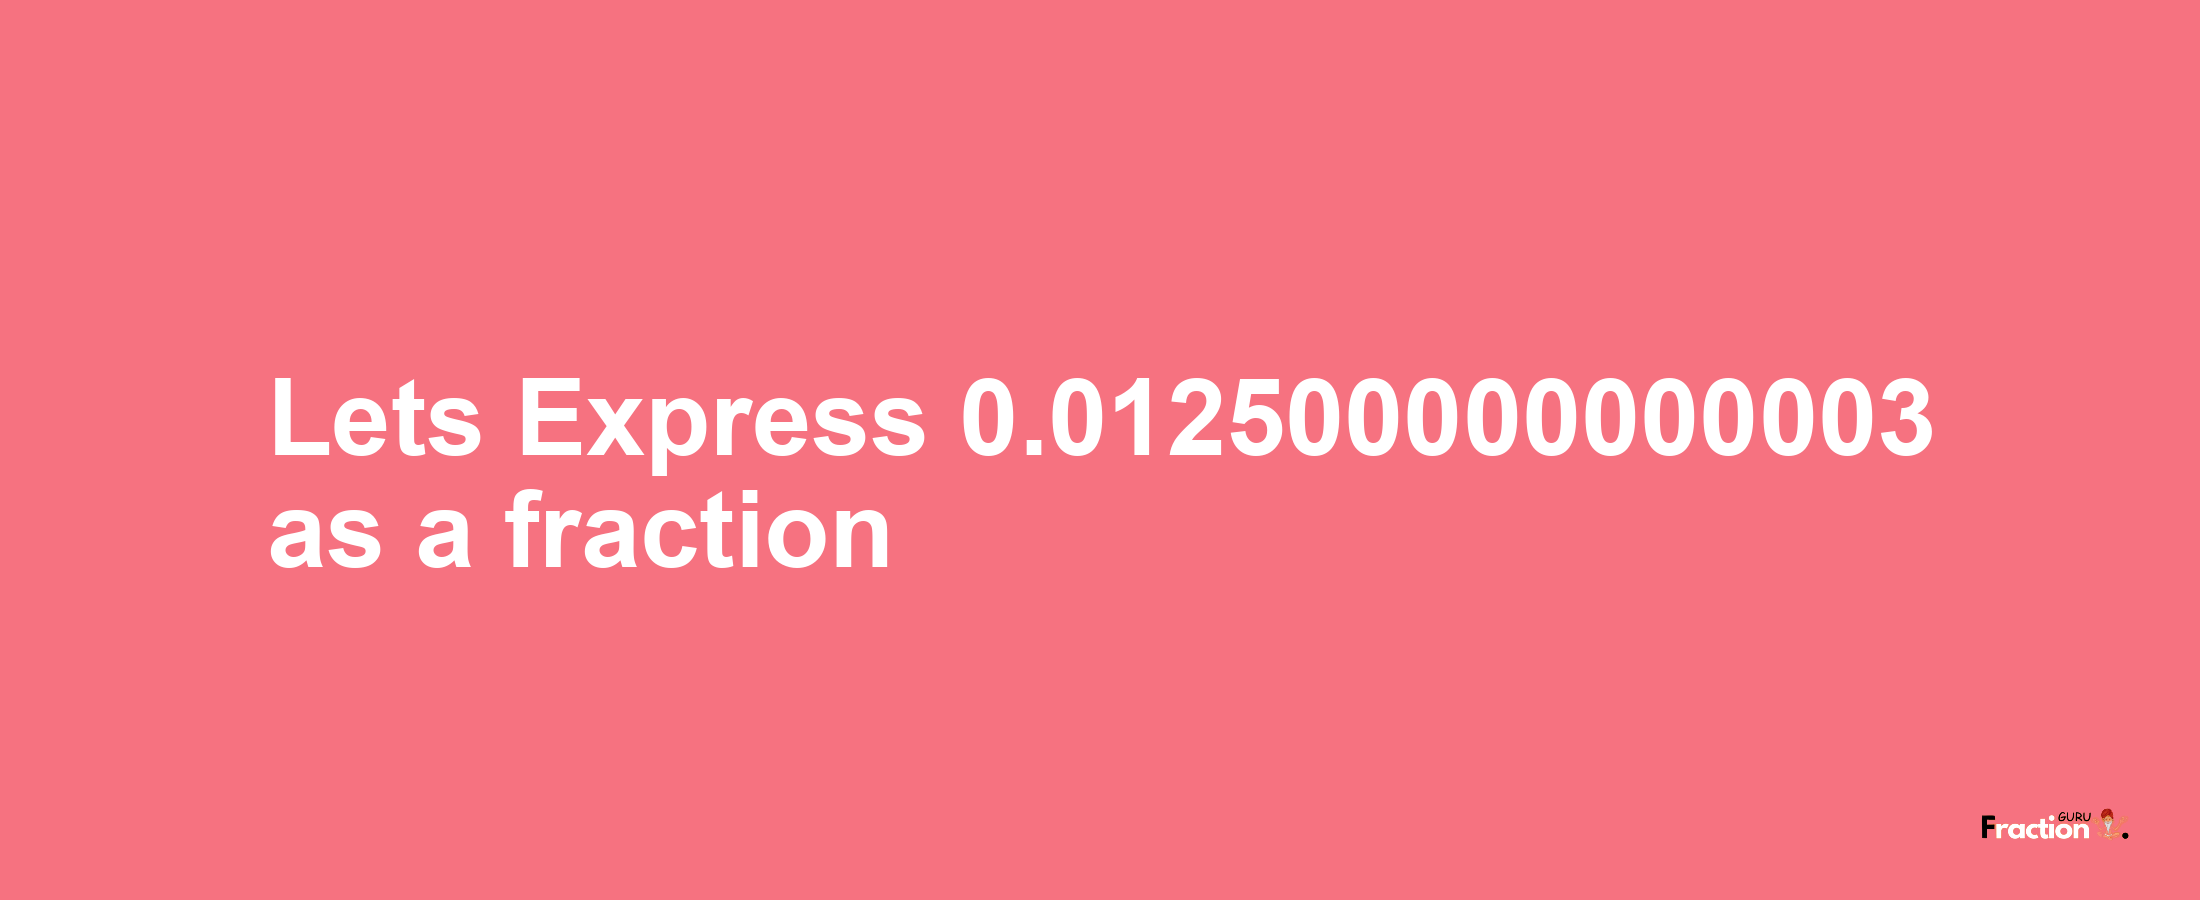 Lets Express 0.012500000000003 as afraction